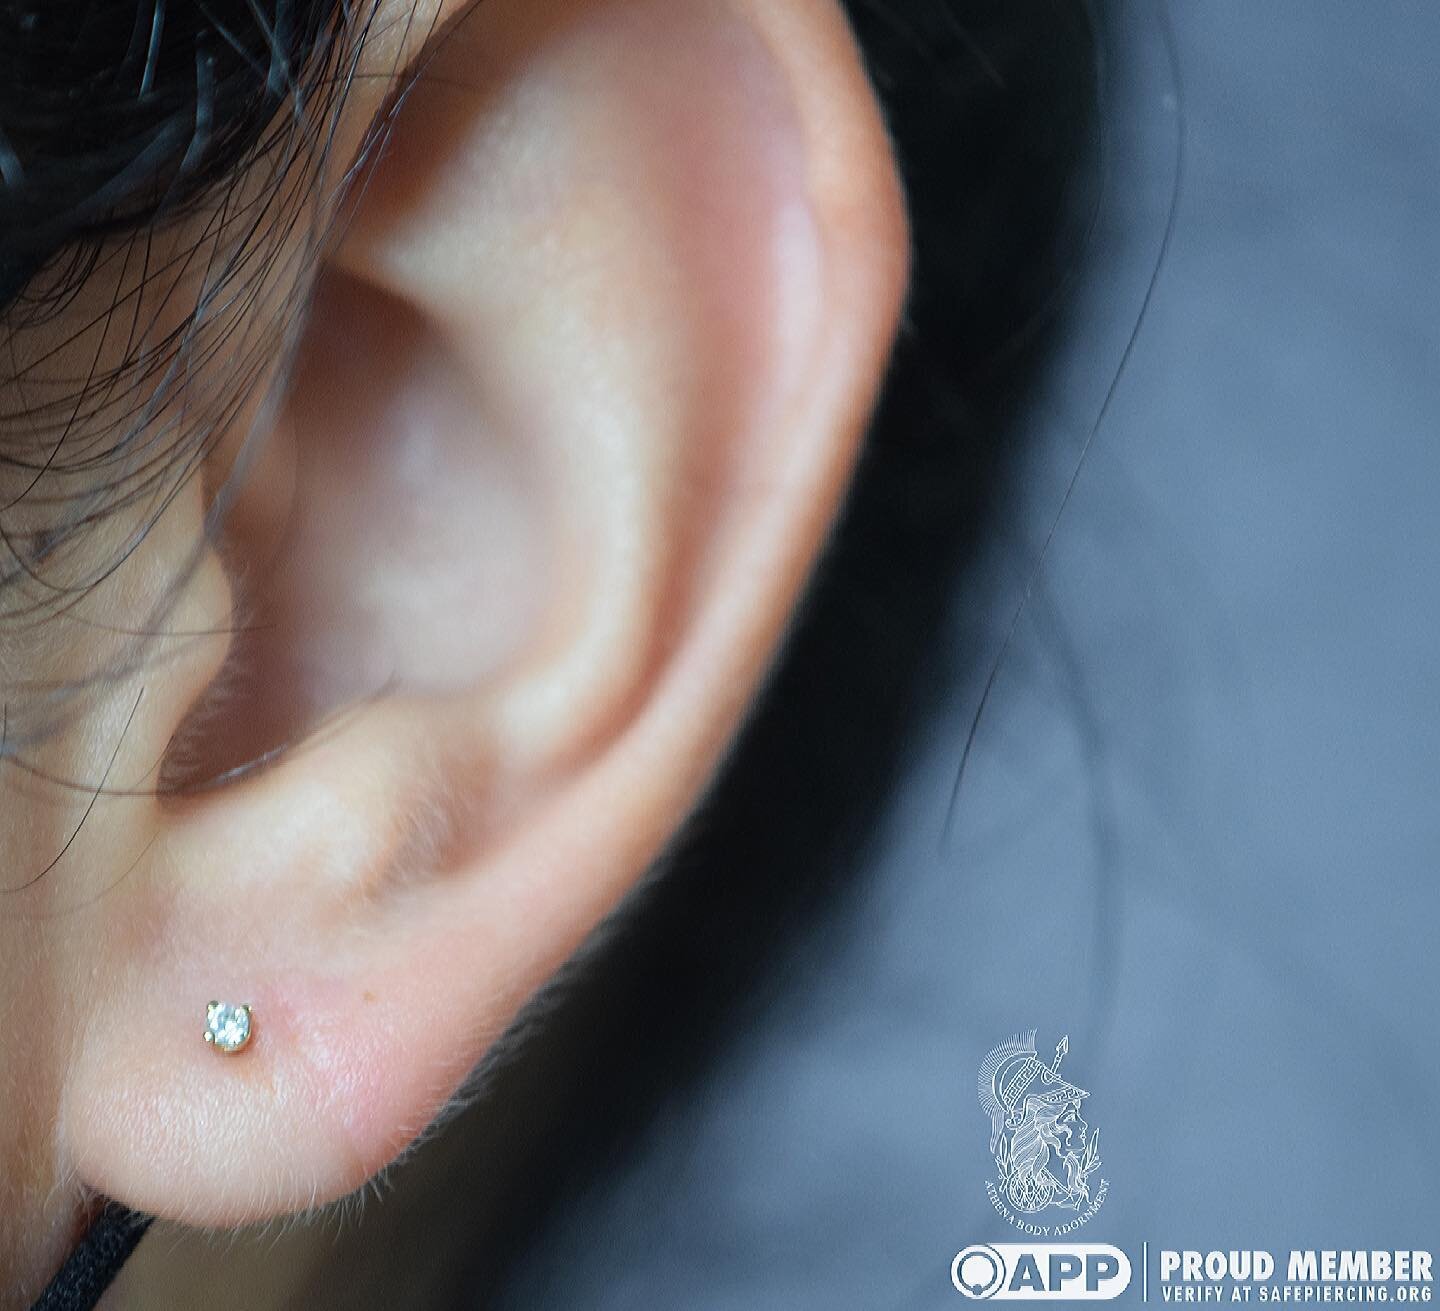 We were so happy to perform this cute little #earlobe for this lovely clients healed reconstructed earlobe! 💫 featuring a genuine diamond from @kiwidiamondjewelry 💫

Athena Body Adornment
1650 N. Federal Highway 
Suite 103
Pompano Beach, Florida 33